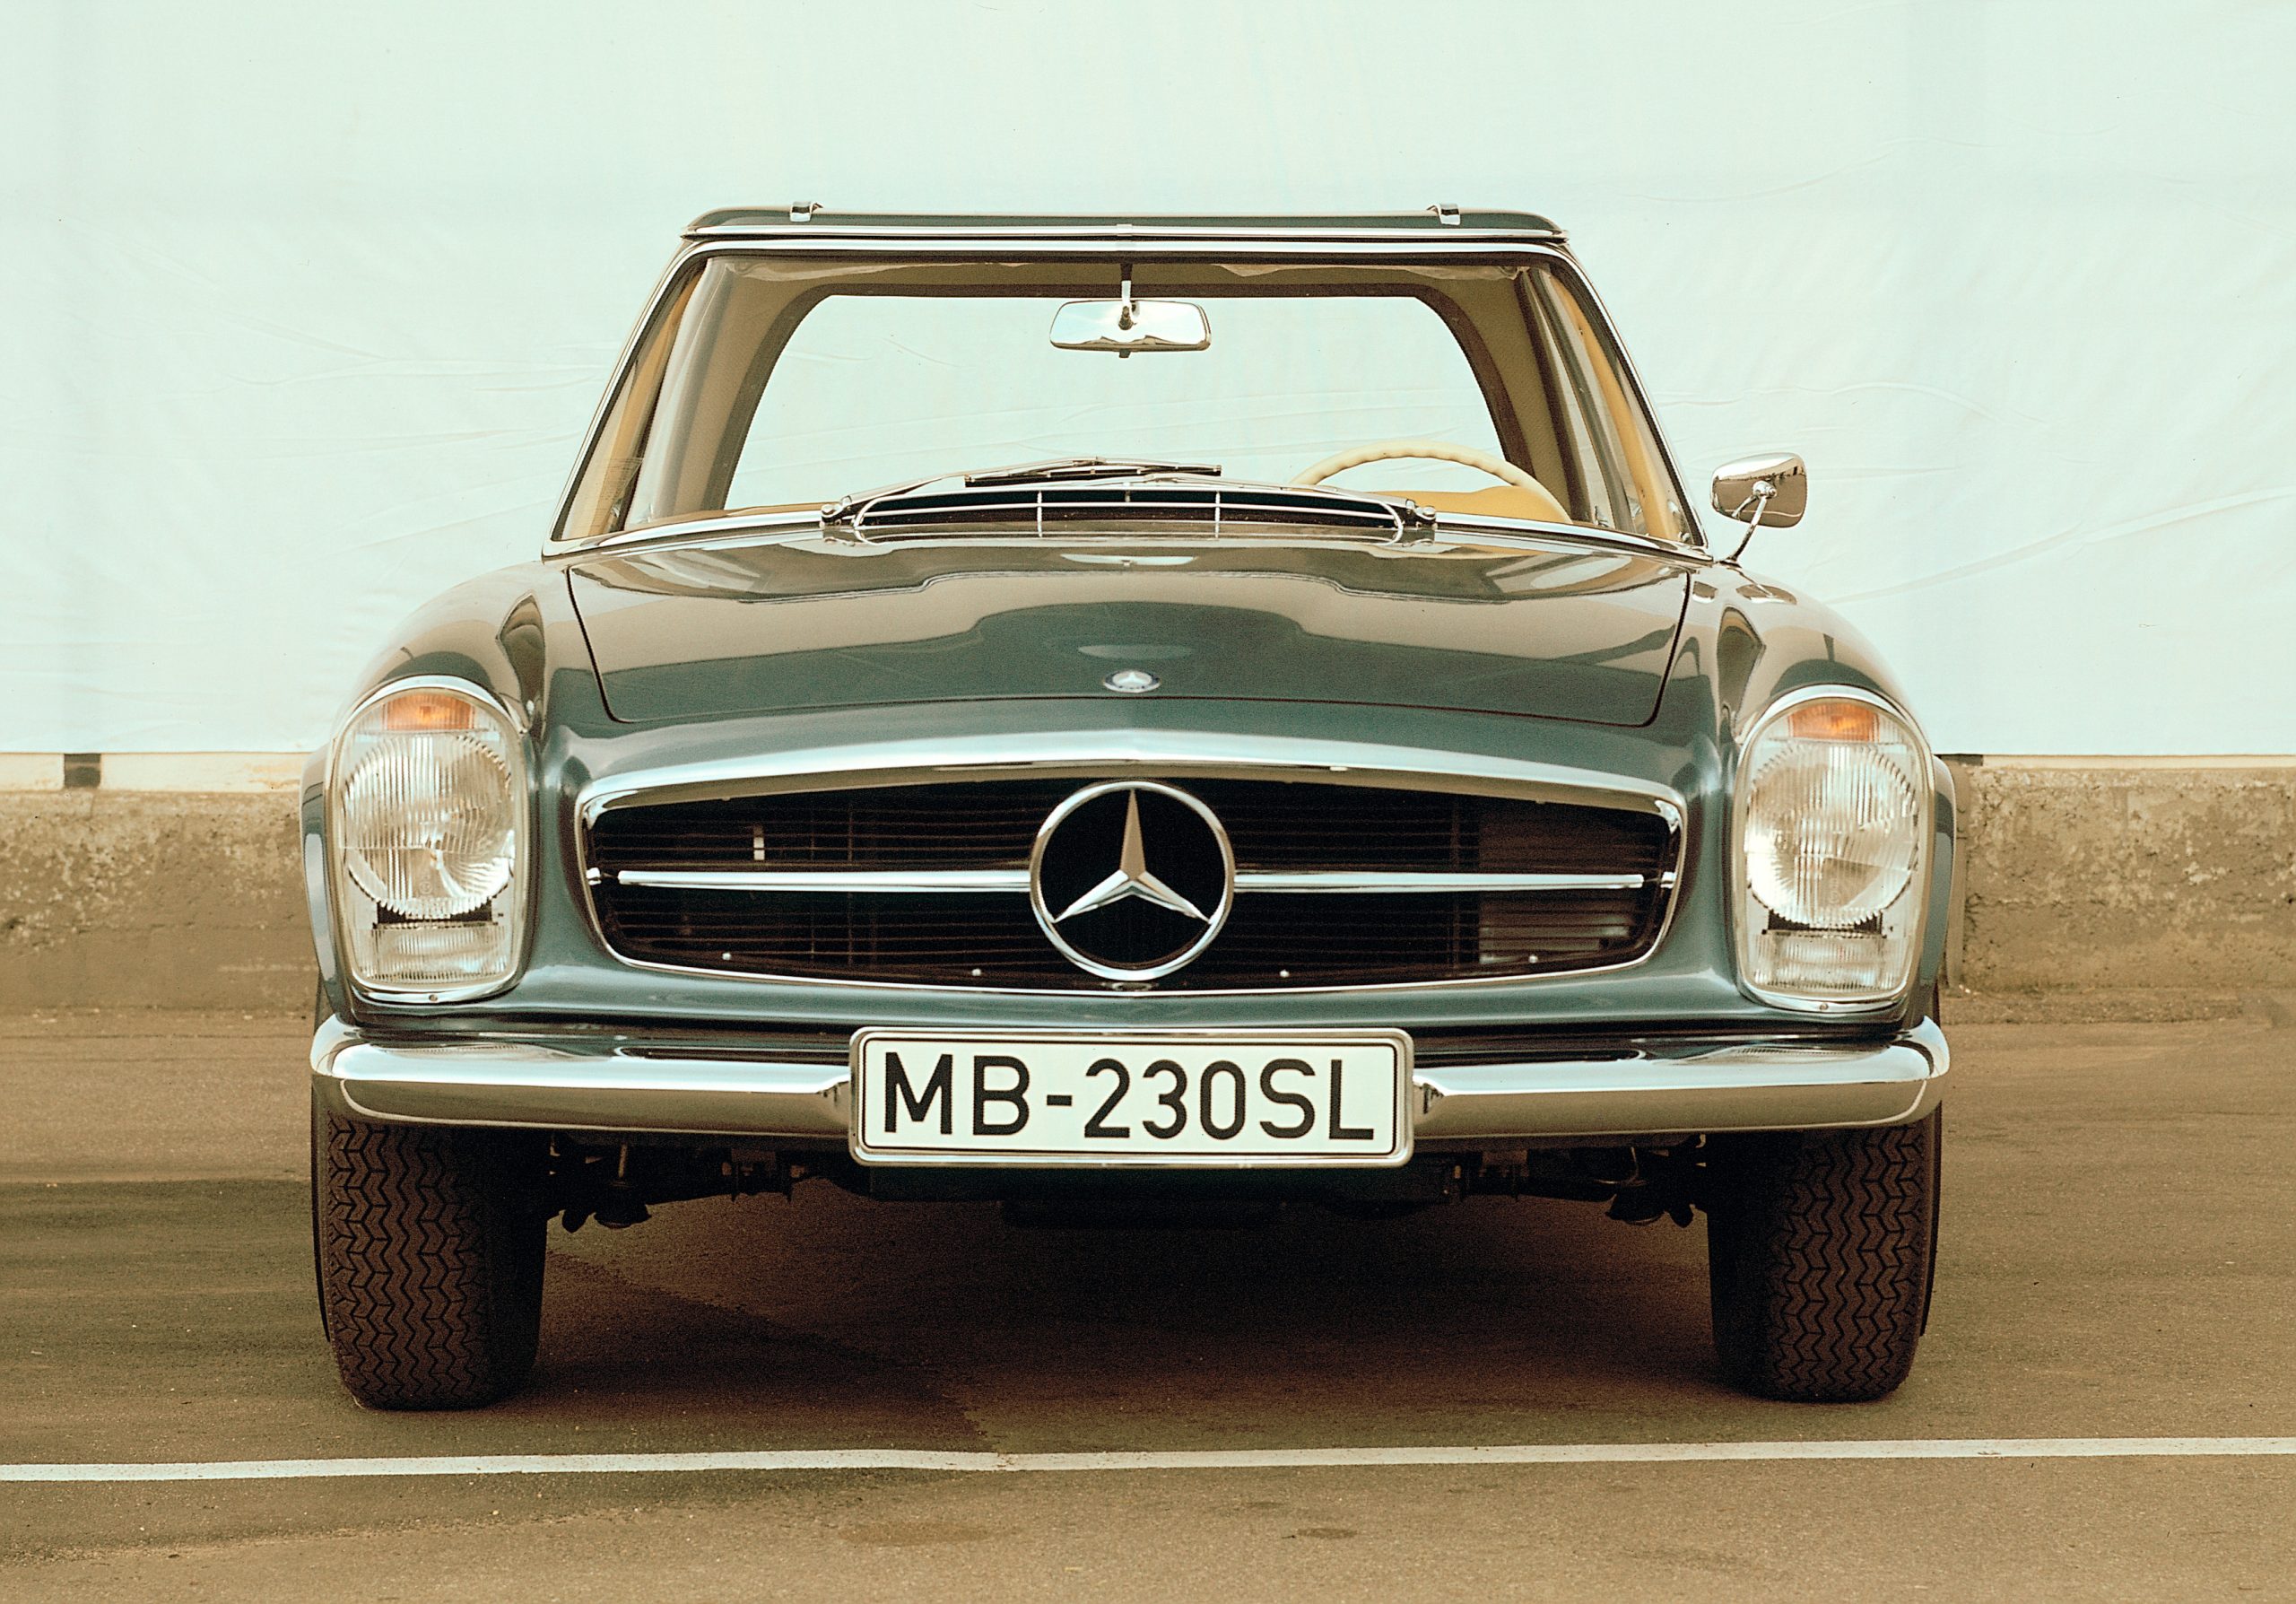 60 years on, the Mercedes SL Pagoda remains a masterclass in car design